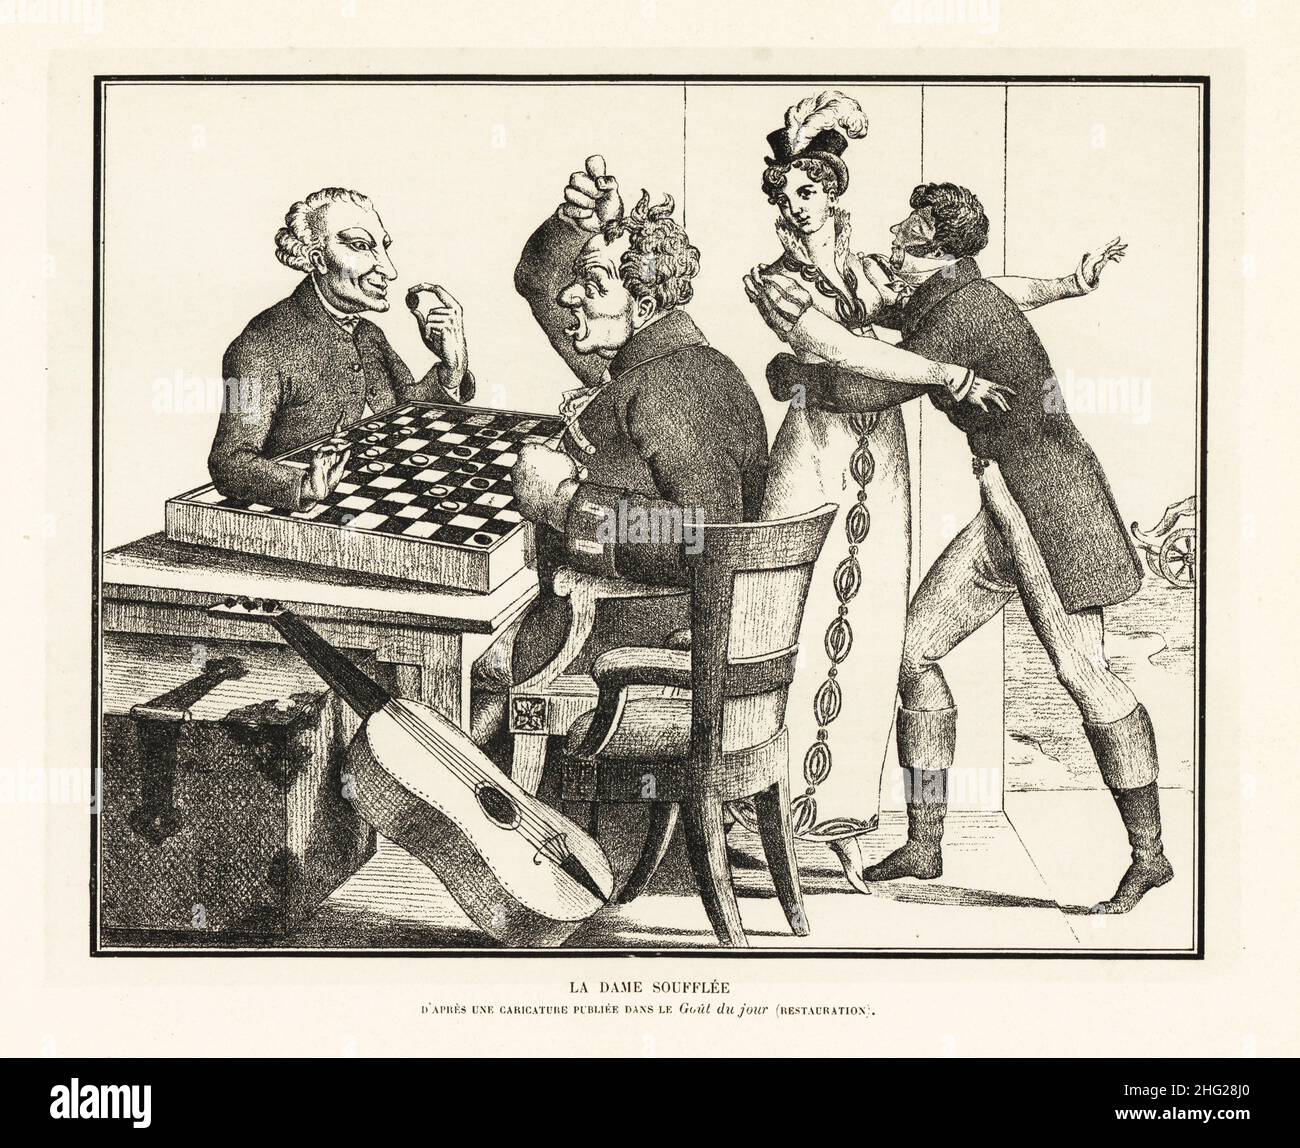 Two men playing checkers at a table, Bourbon Restoration. One holds a checker, the other raises his fist, a woman is consoled by a gentleman. La Dame Soufflee. Jeu de Dames. From Aaron Martinet's Caricatures Parisiennes or Gout du Jour. Lithograph from Henry Rene d’Allemagne’s Recreations et Passe-Temps, Games and Pastimes, Hachette, Paris, 1906. Stock Photo